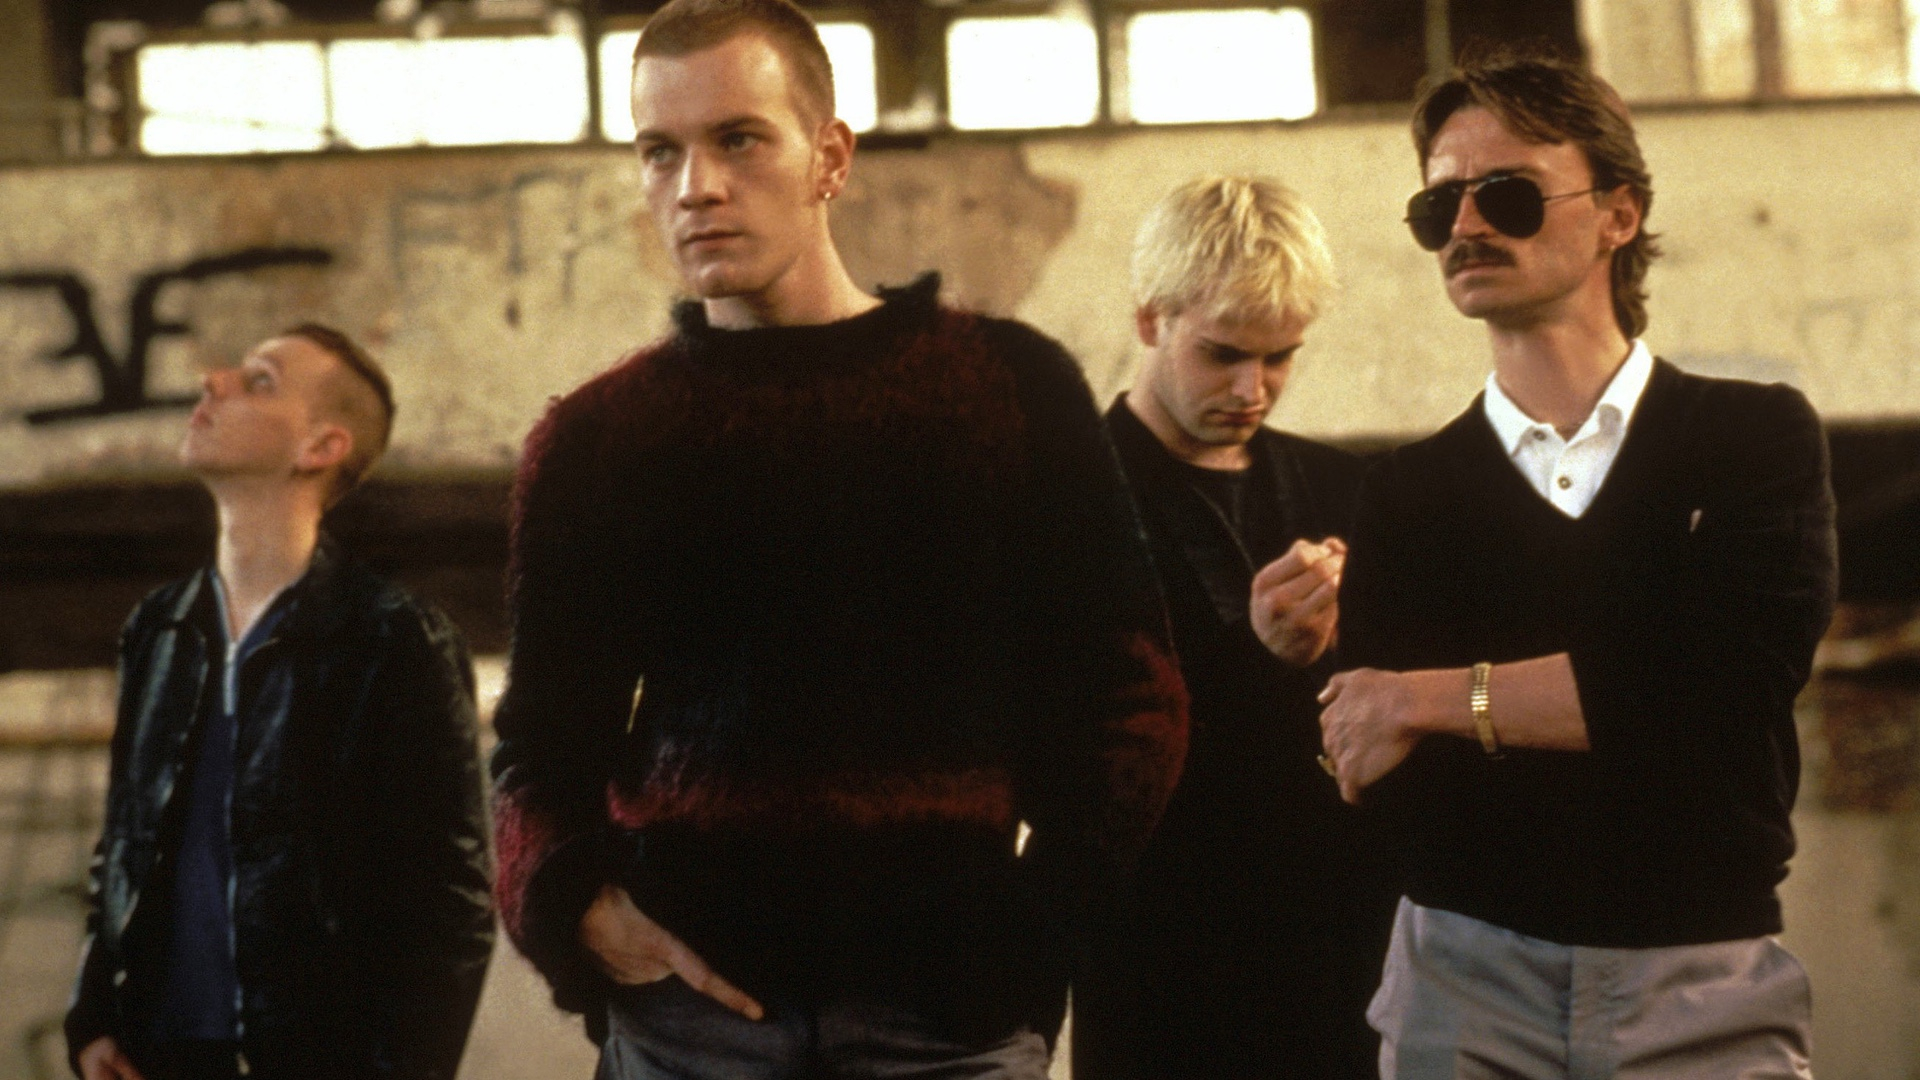 1920x1080 TRAINSPOTTING 2 Cast Confirmed and Release Date Set for 2017 &acirc;&#128;&#148; GeekTyrant